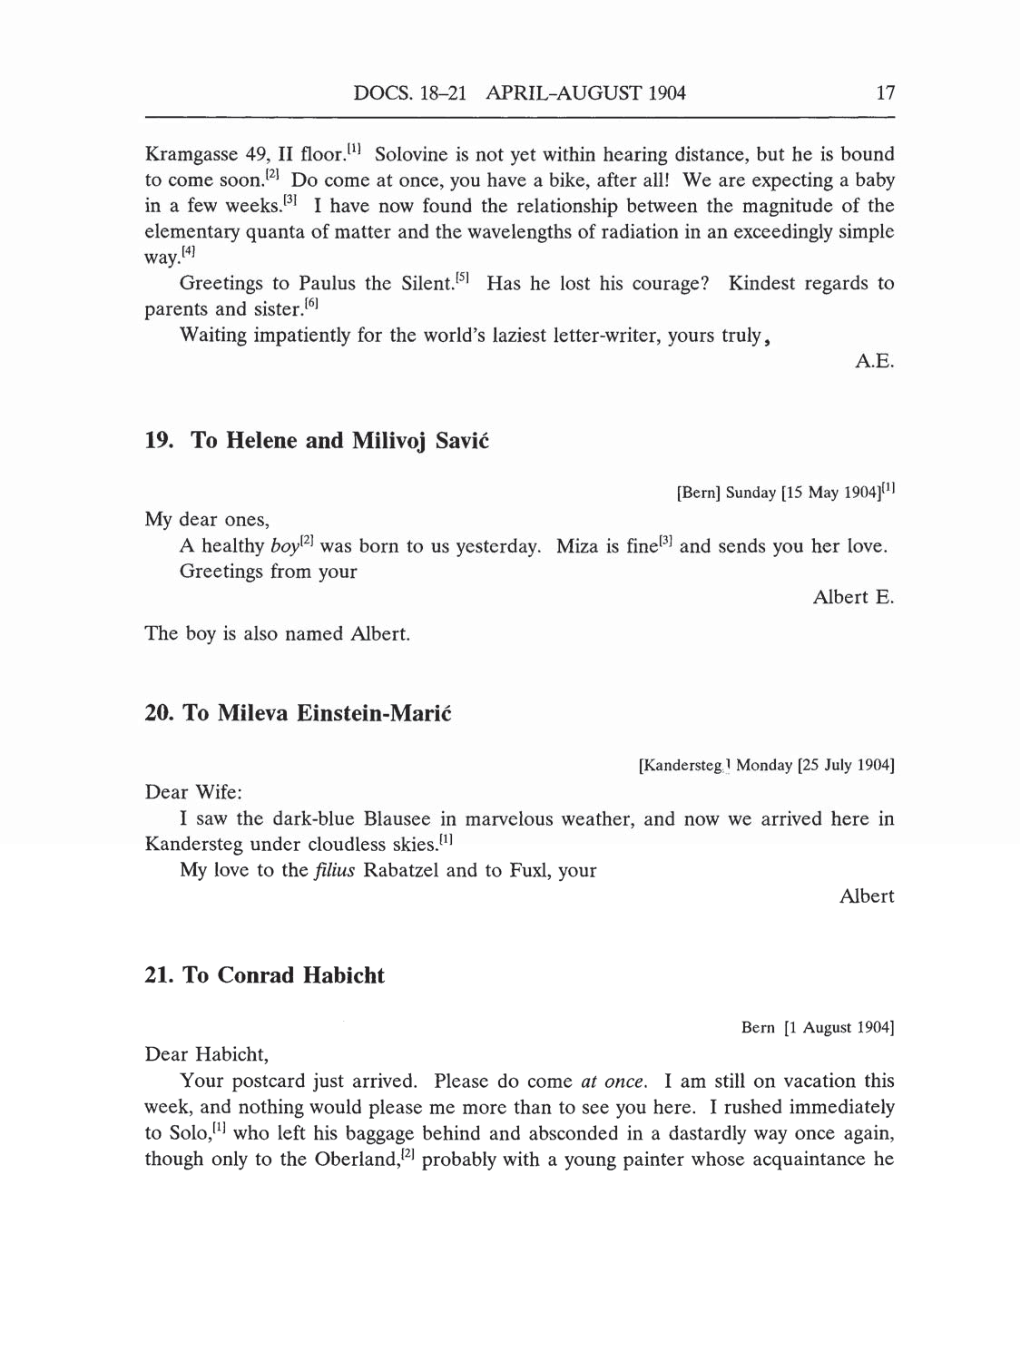 Volume 5: The Swiss Years: Correspondence, 1902-1914 (English translation supplement) page 17